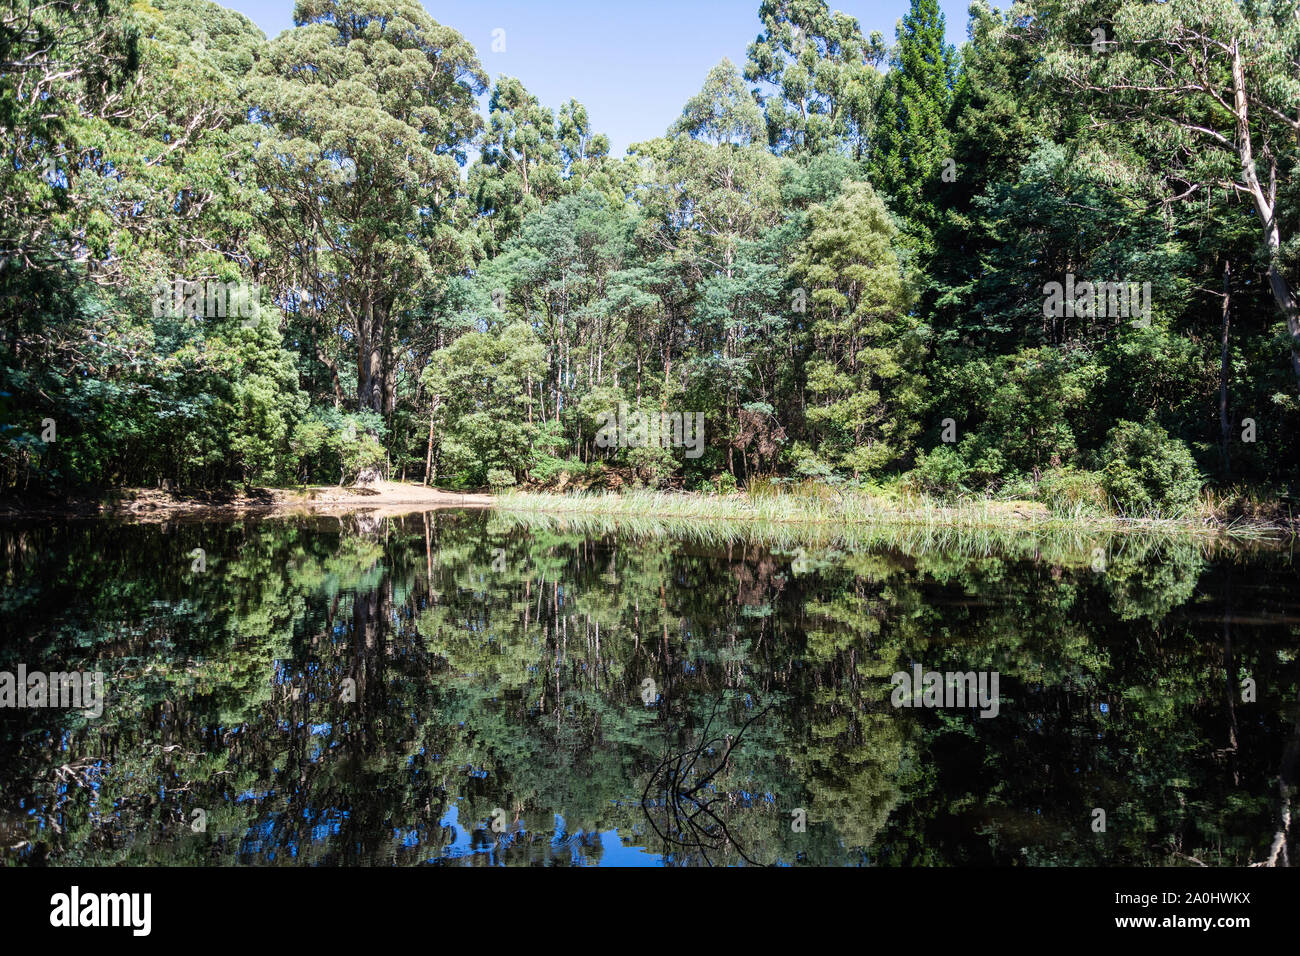 Man-made Sanatorium Lake in Macedon Ranges area of Victoria, Australia, with eucalyptus trees reflections in the water. Stock Photo